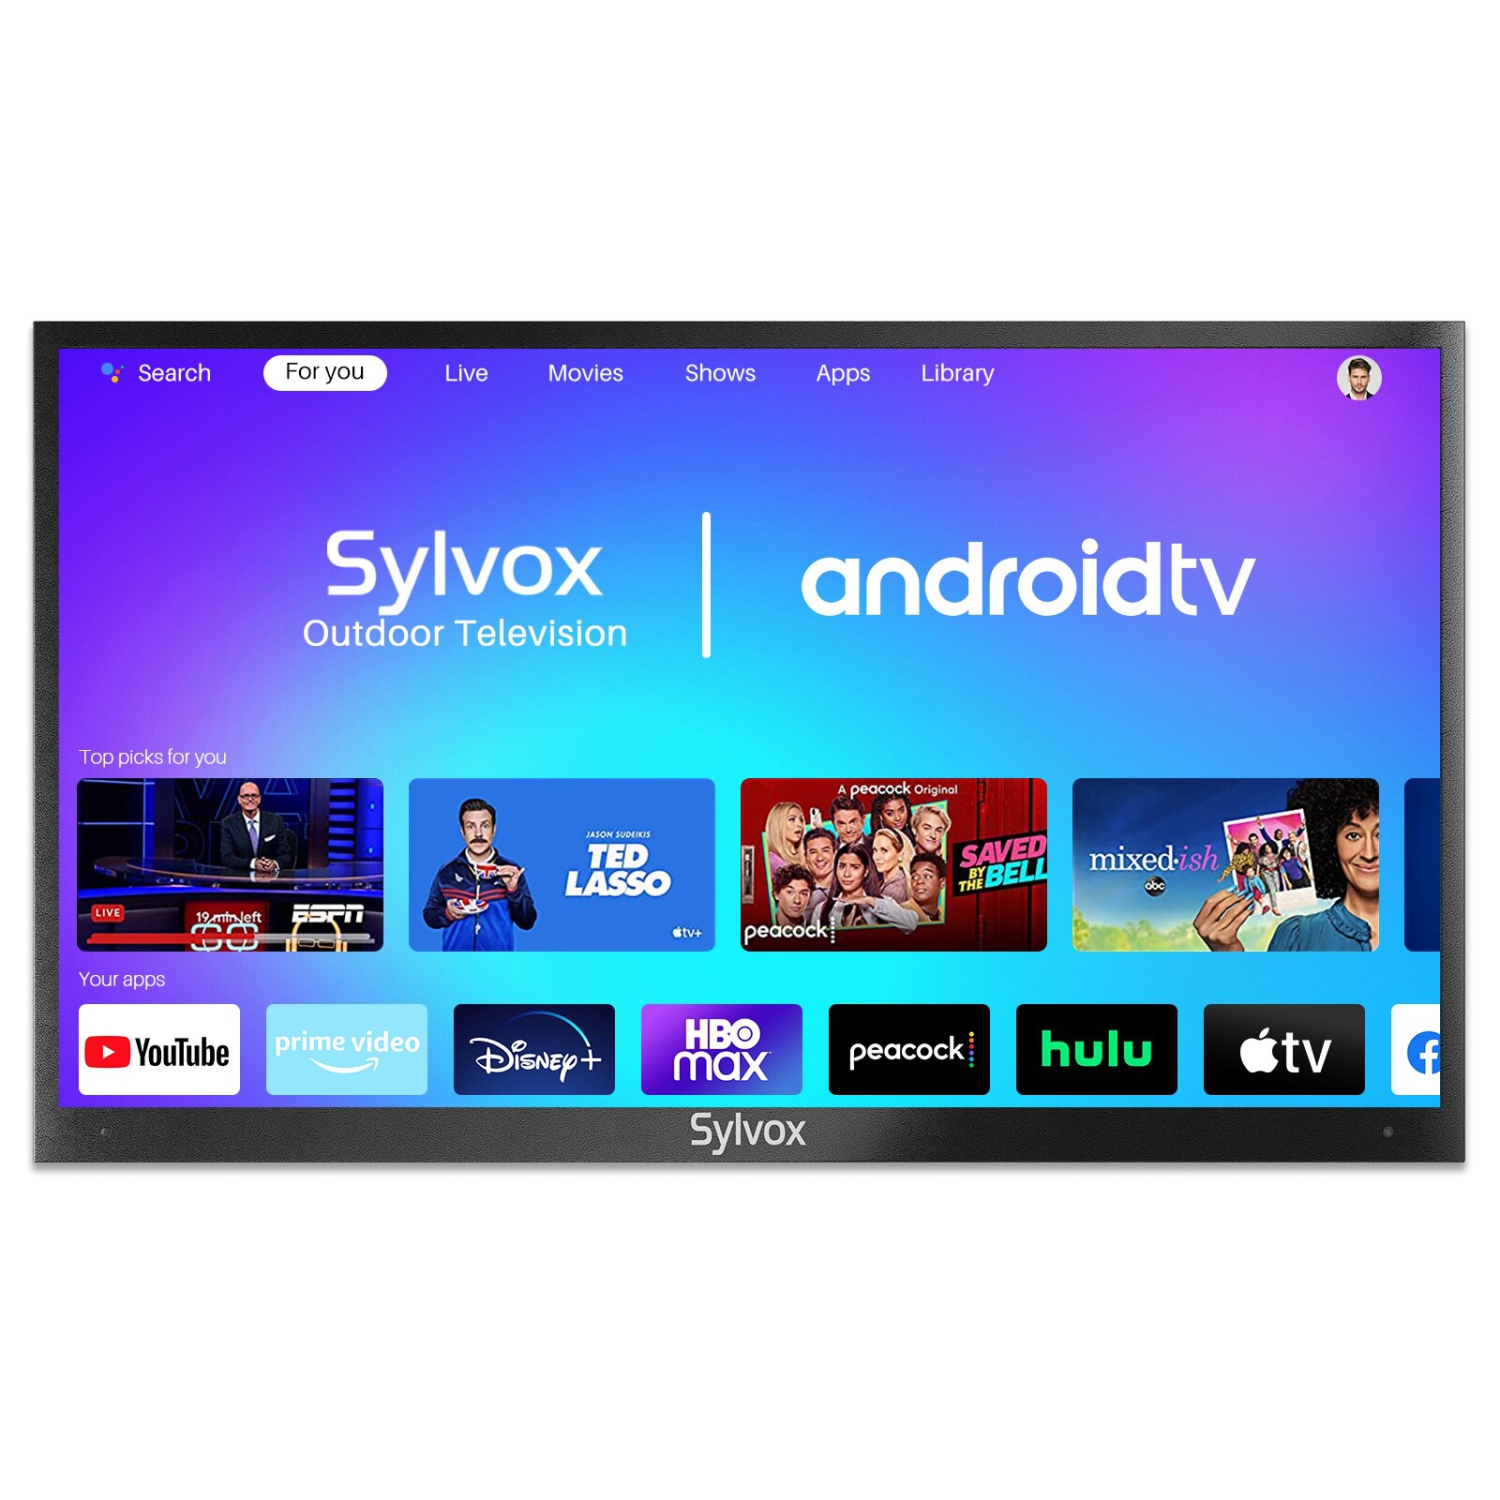 SYLVOX Outdoor TV Deck Pro Series 55" 4K UHD Smart TV with Voice Remote IP55 Waterproo Chromecast Built-in 60Hz Designed for Outdoor